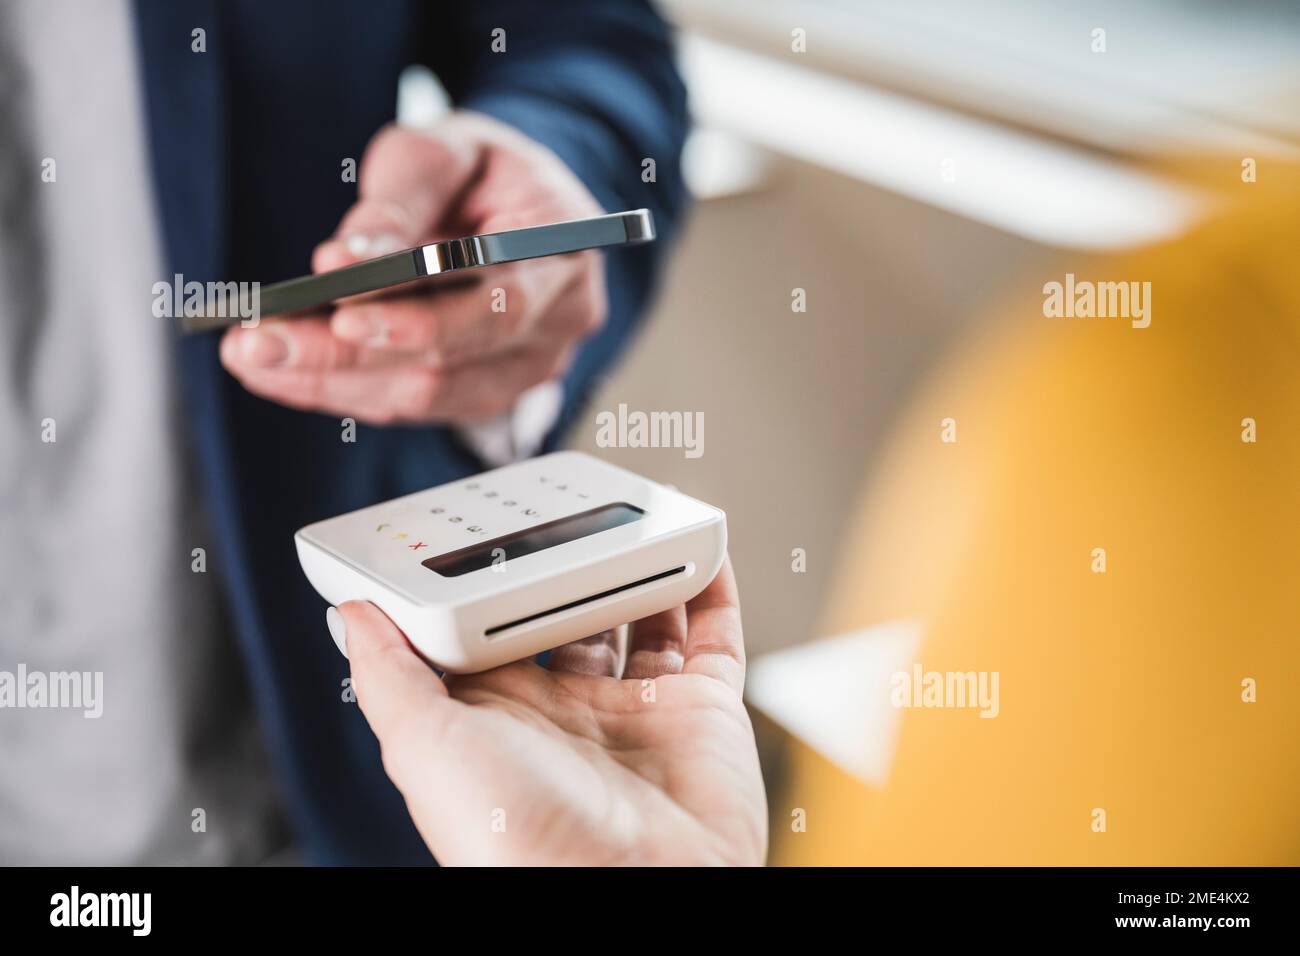 Hand of businessman paying with smart phone on card reader machine Stock Photo